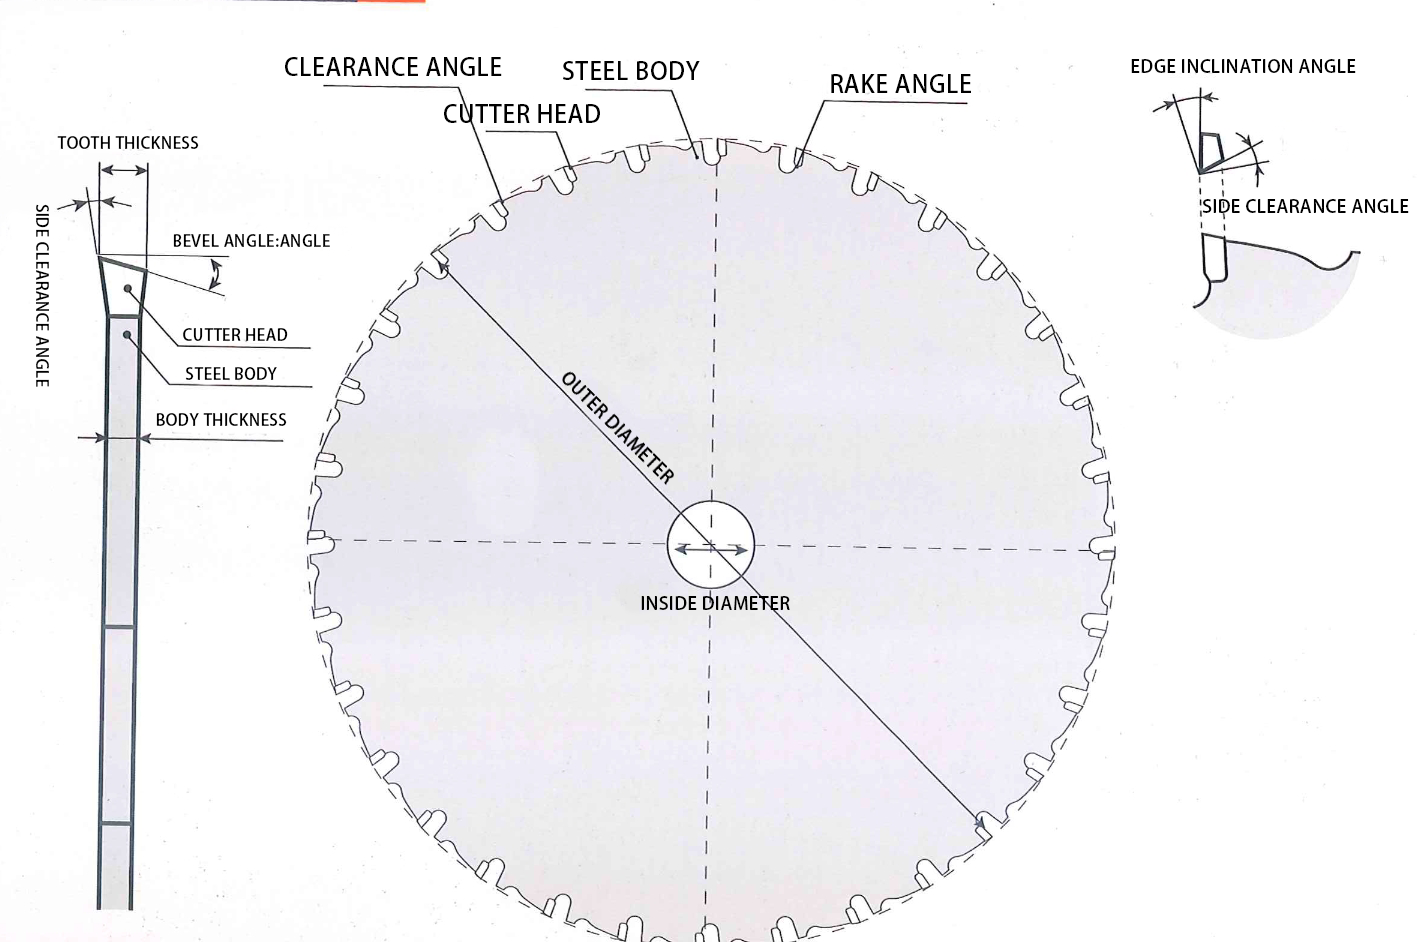 The composition of the saw blade